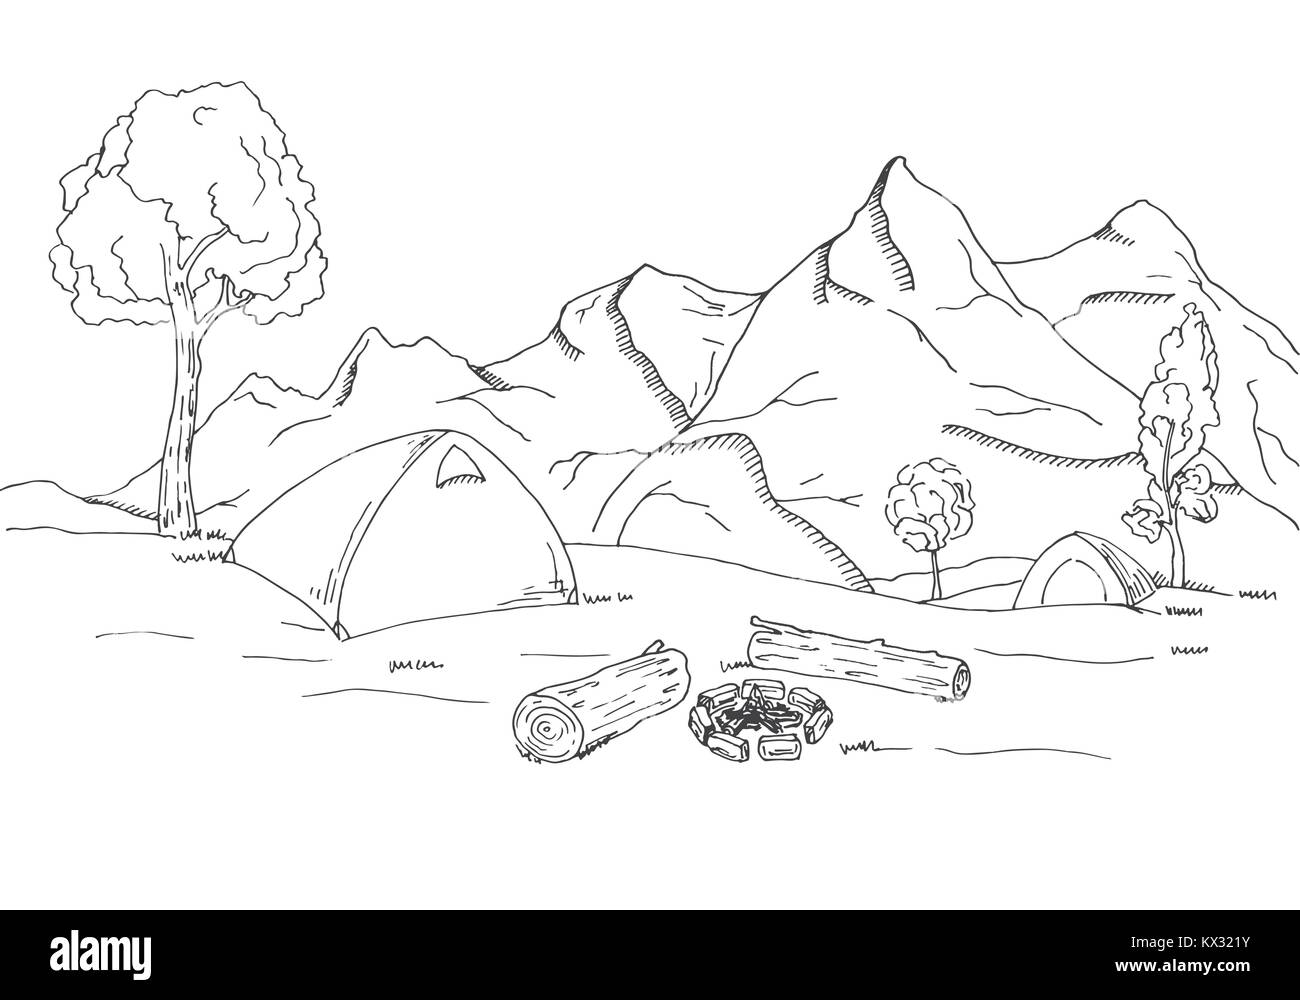 Premium Vector | Lake and mountain scenery illustration design sketch, with  black outline hand drawn style